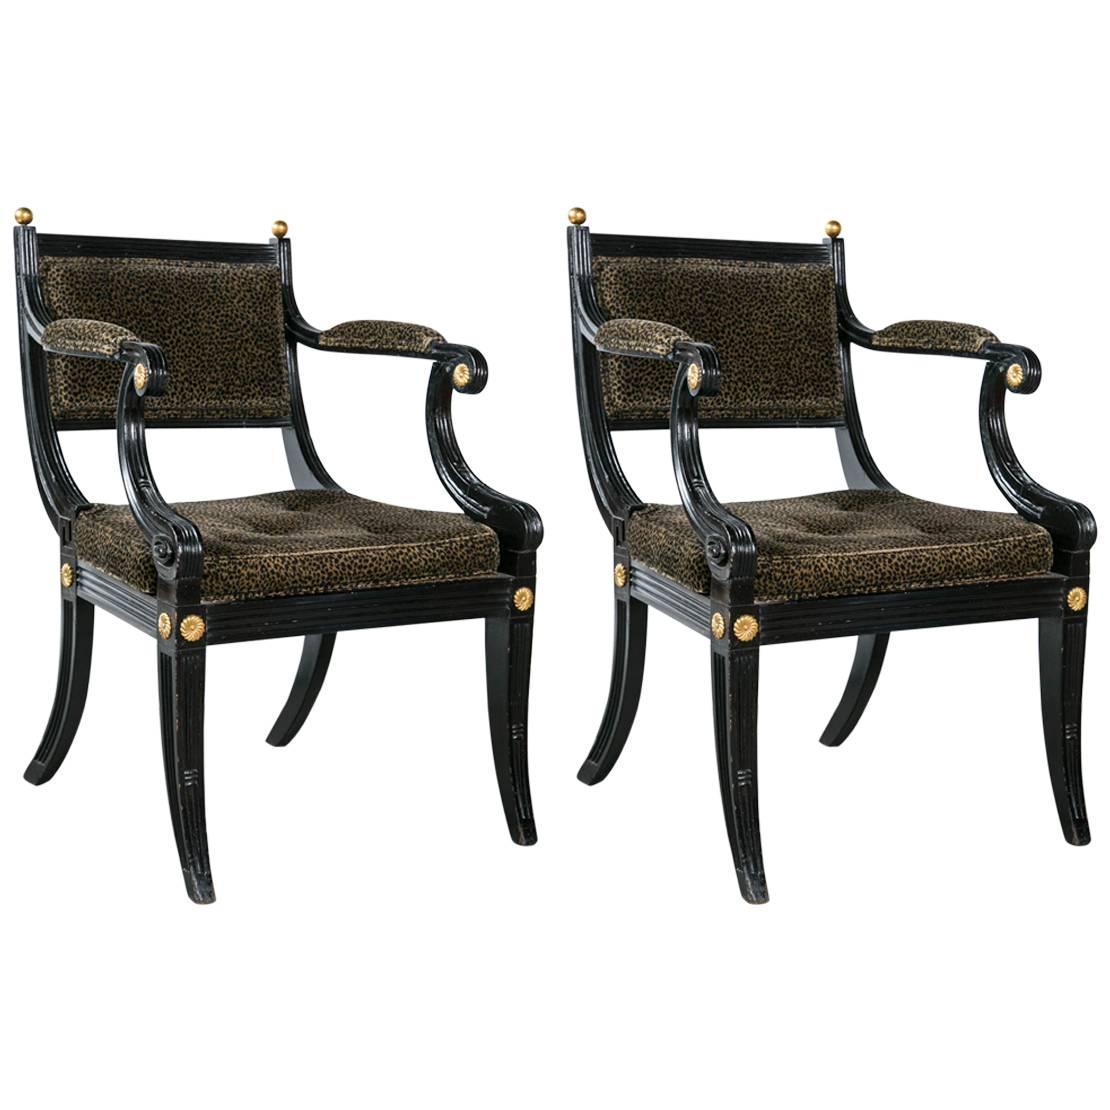 Pair of English Regency Klismos Chairs For Sale